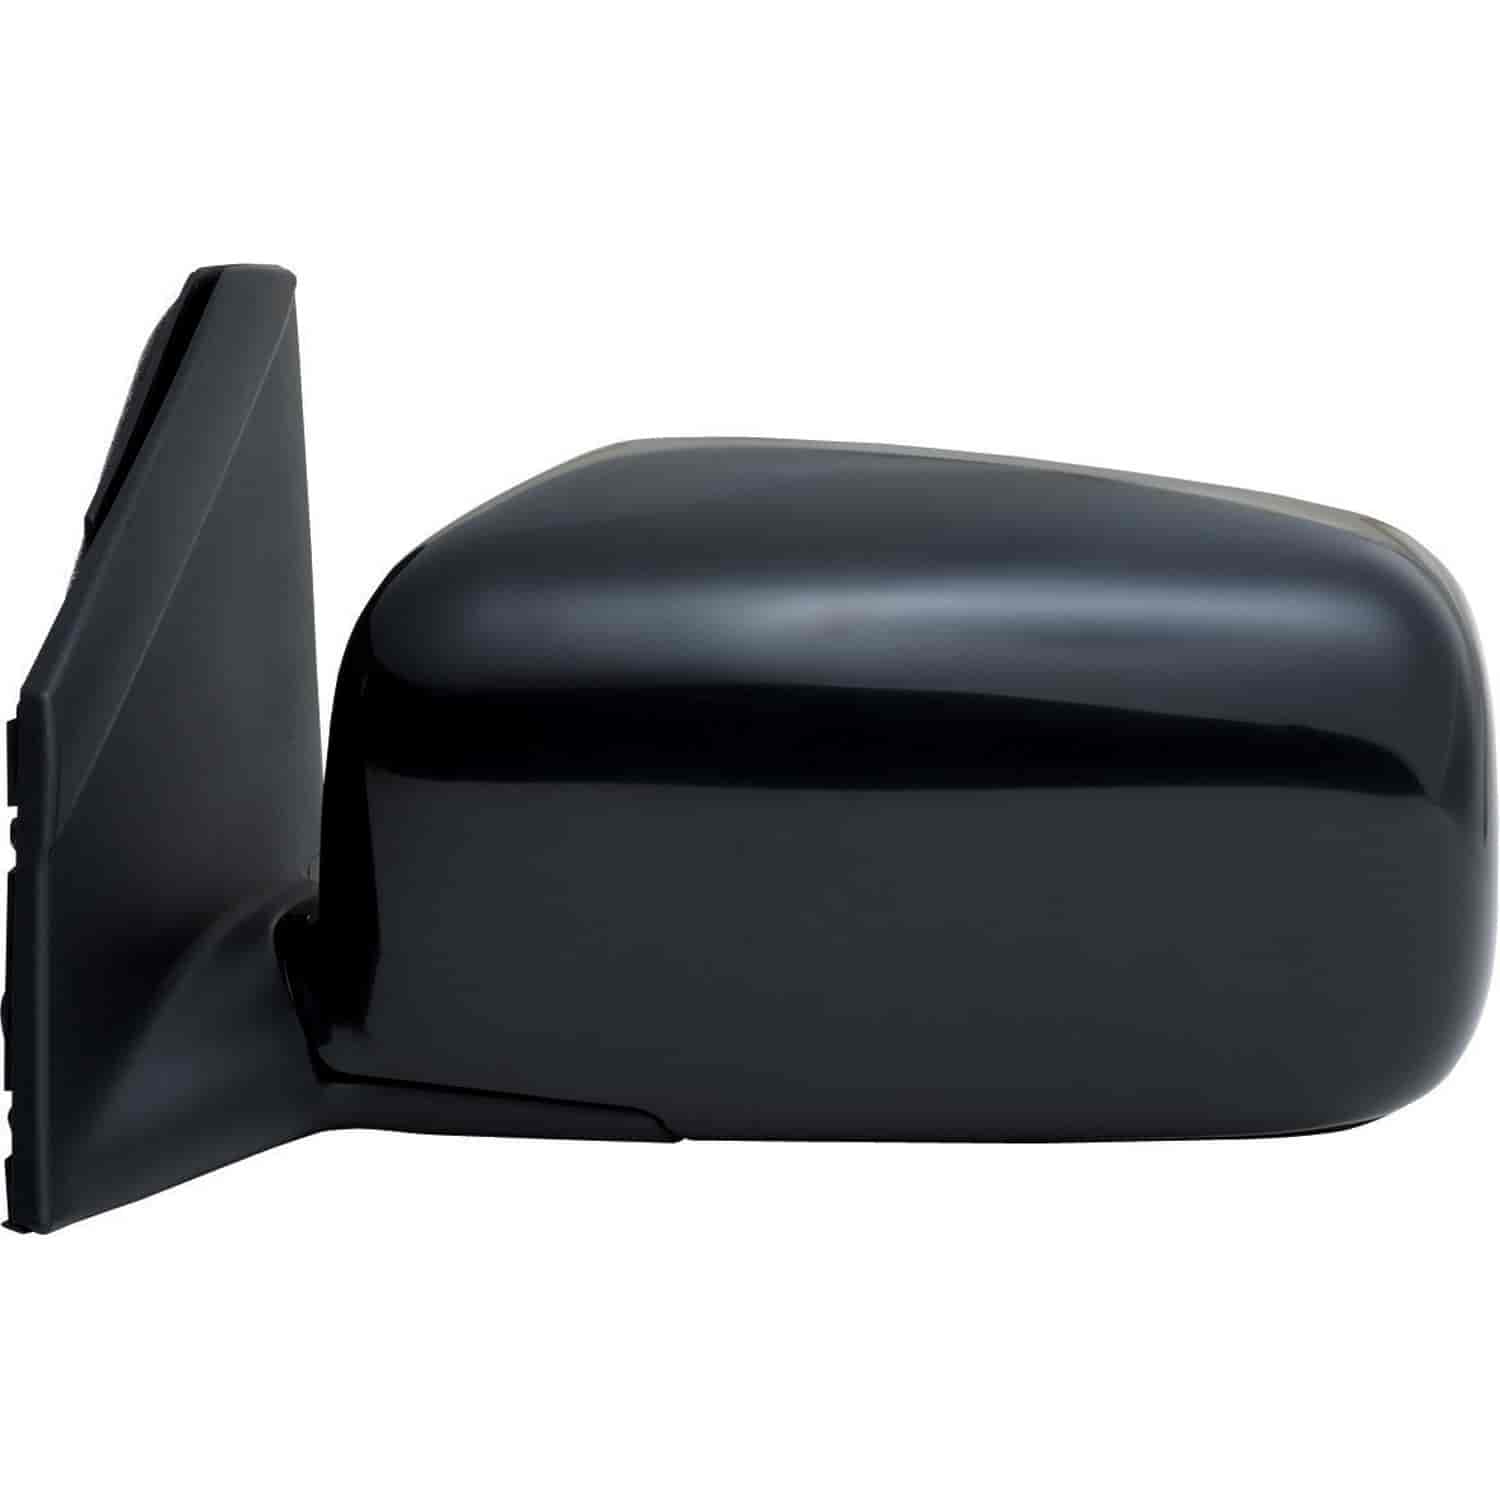 OEM Style Replacement mirror for 04-14 Nissan Titan S 04-10 XE Model driver side mirror tested to fi